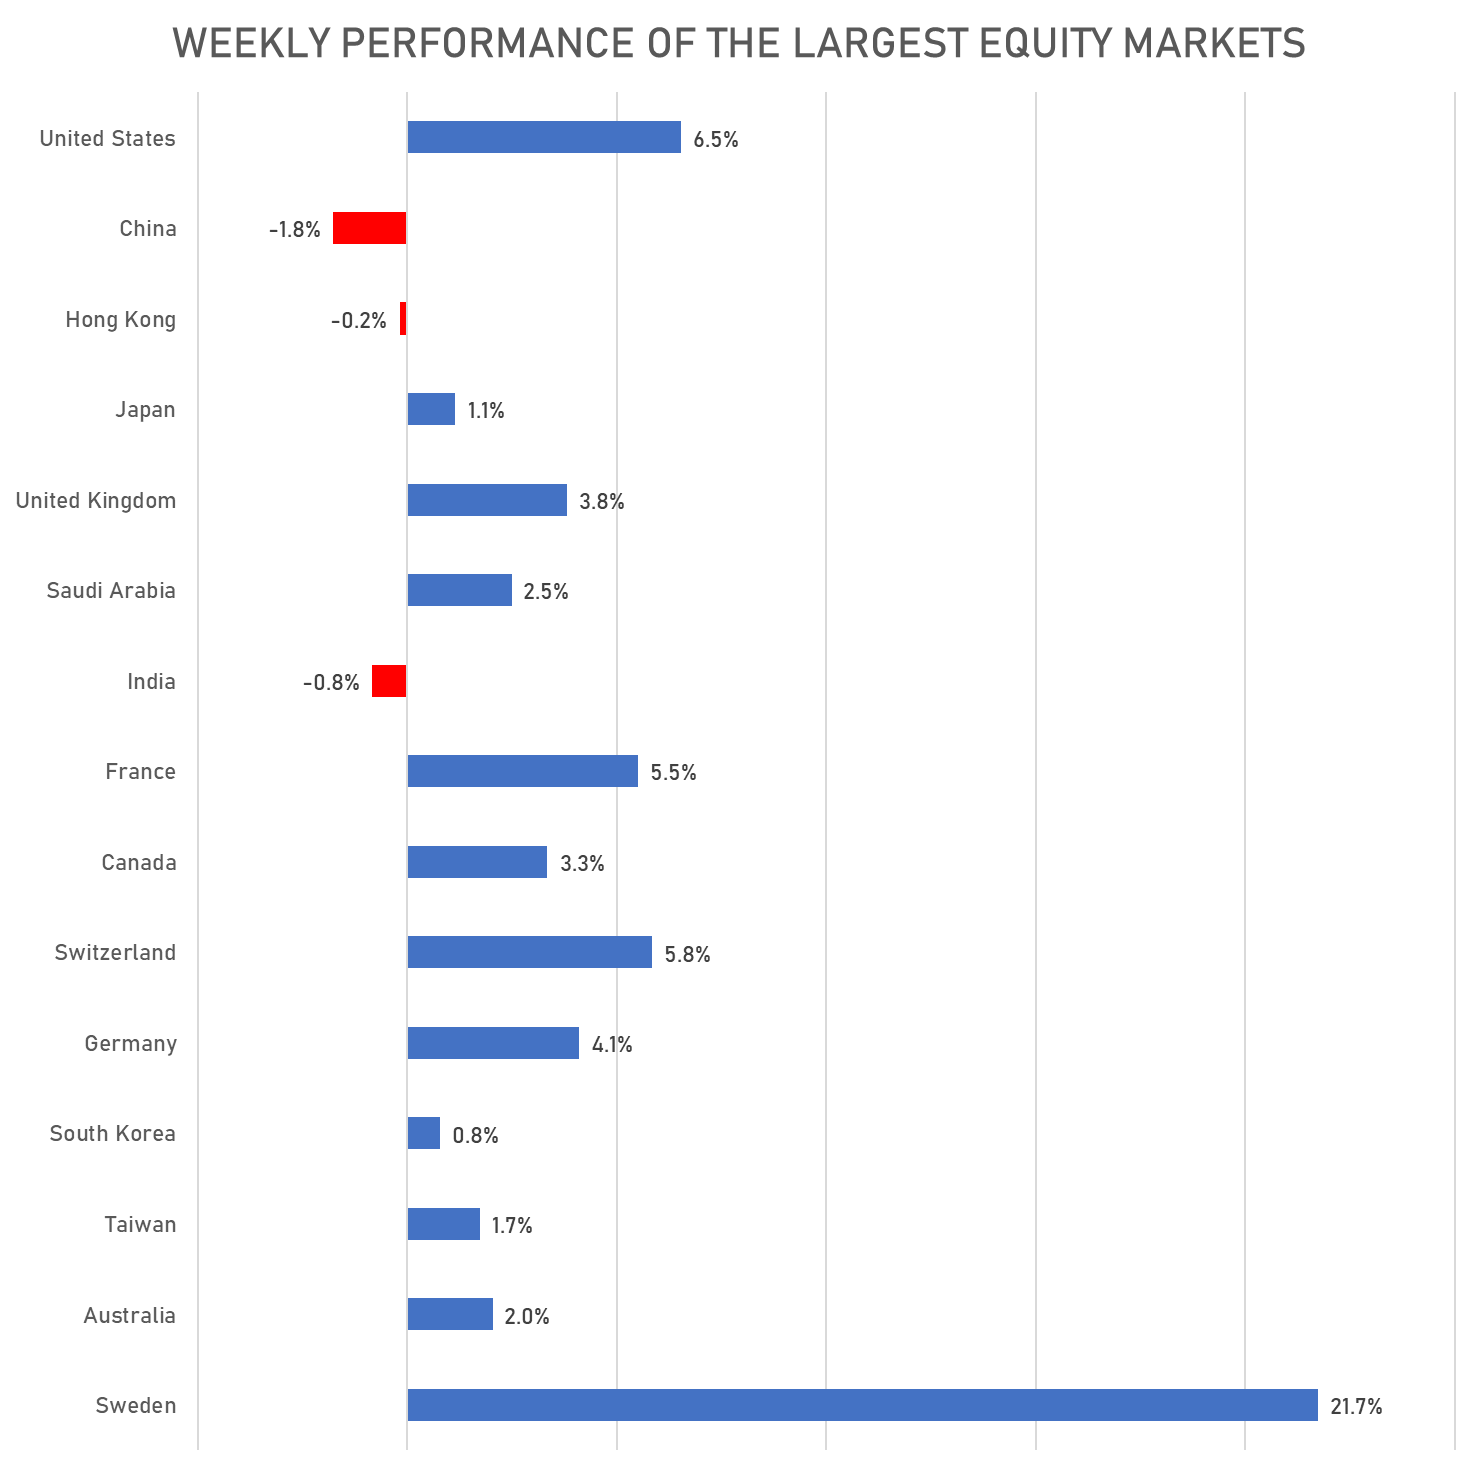 Weekly total returns for the largest global equity markets